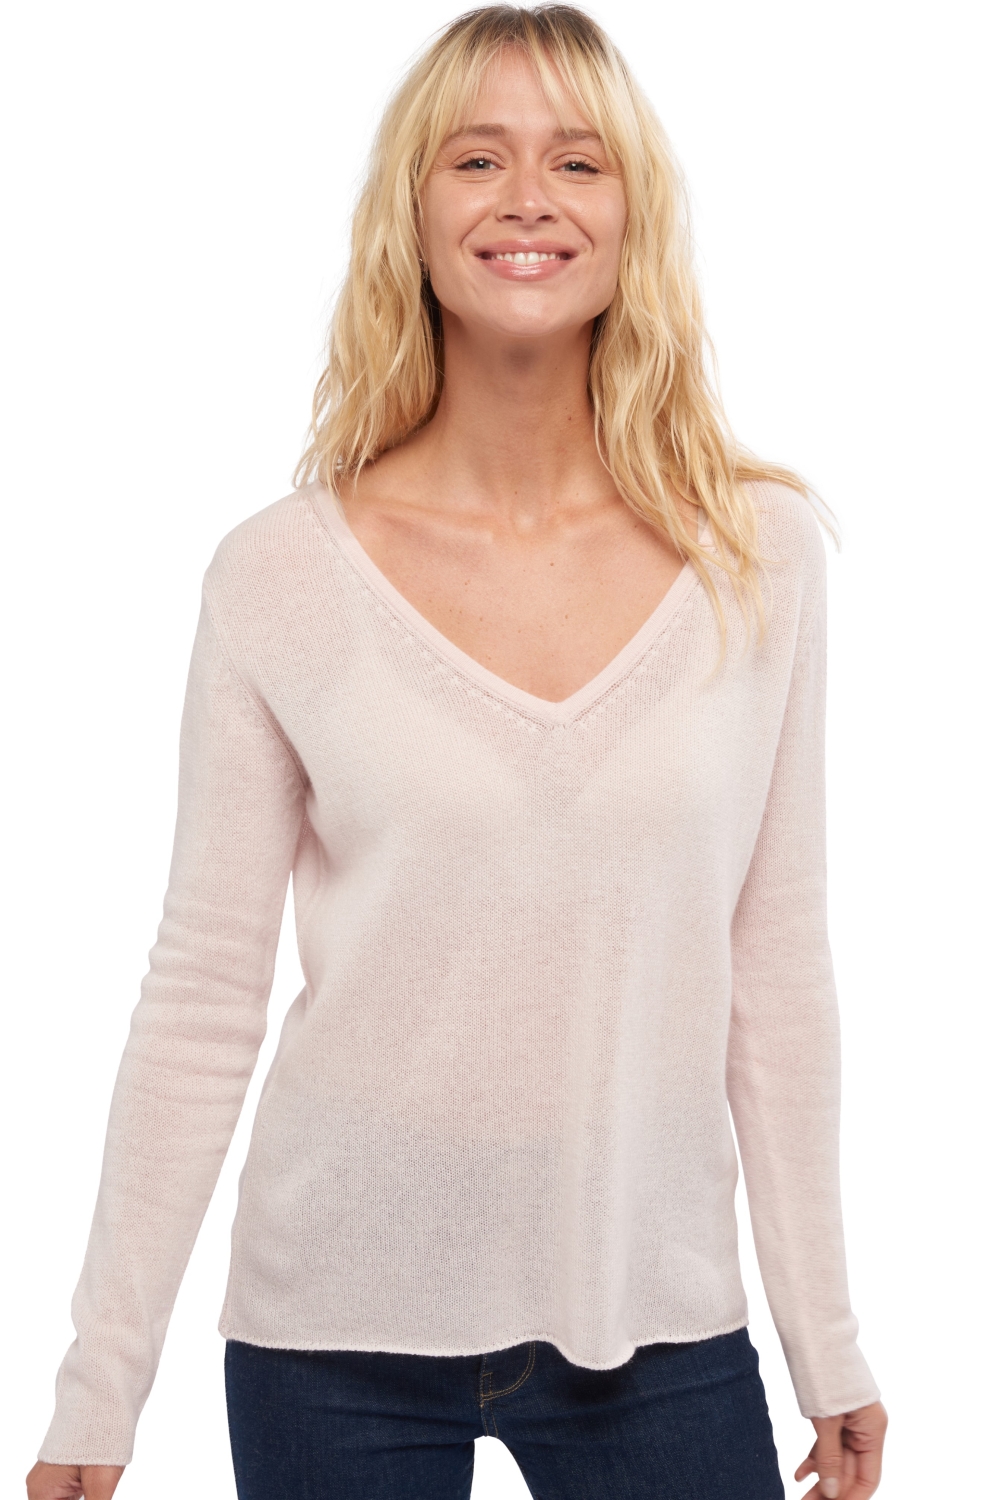 Cashmere ladies basic sweaters at low prices flavie shinking violet 3xl